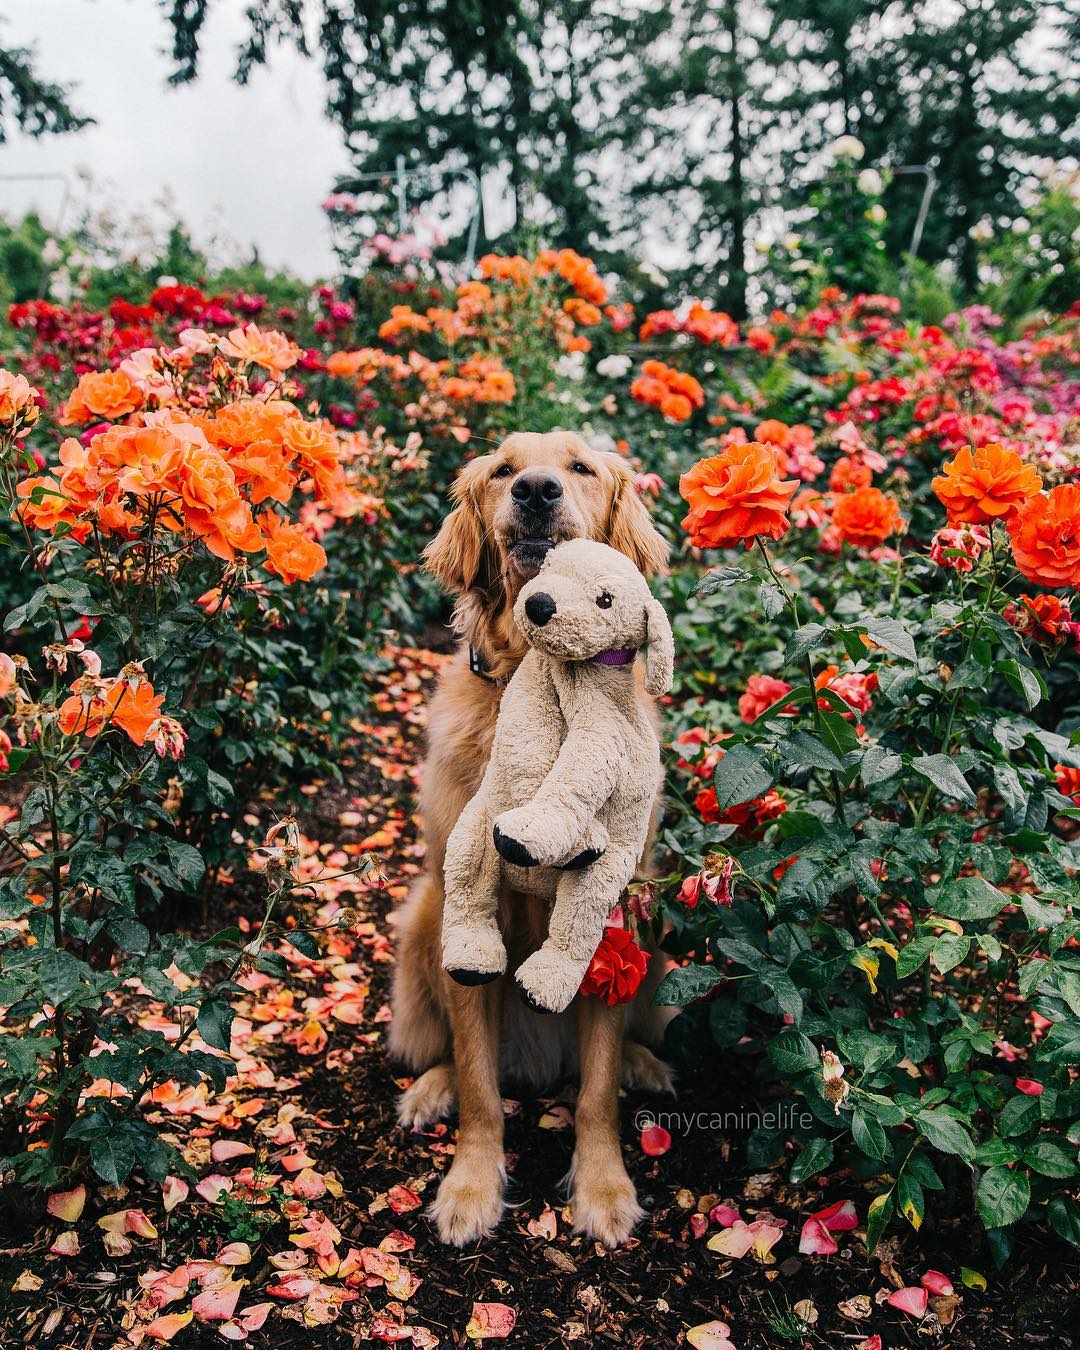 Golden retriever holding a stuffed dog in the middle of a rose garden Photo by Instagram user @mycaninelife